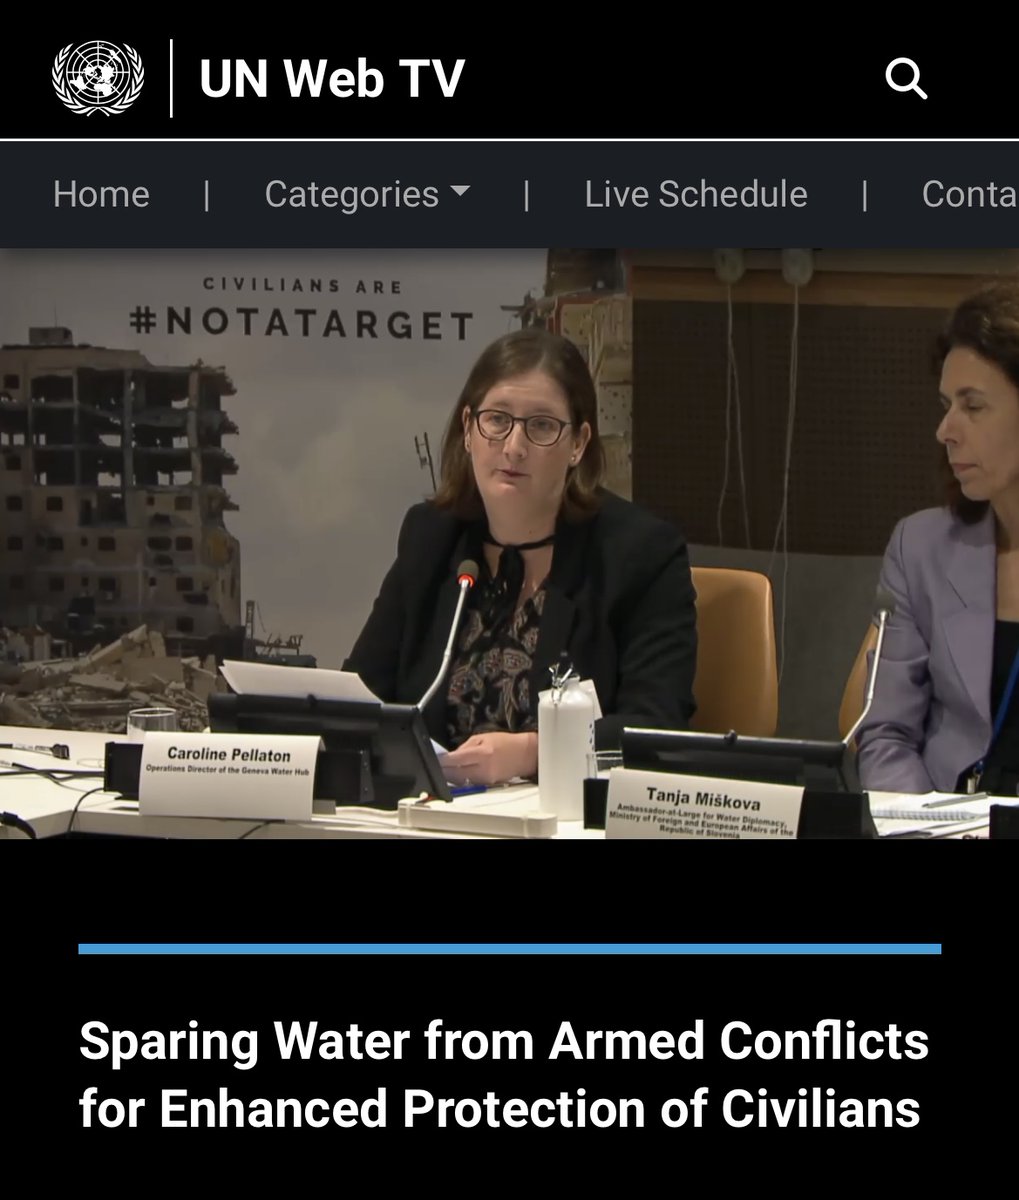 🎉 Successful launch of the Global Alliance to Spare Water from Armed Conflicts on May 23 at @UN HQ! Led by Slovenia, Switzerland, & Geneva Water Hub. Learn more and access our report 👉 lnkd.in/d-GHHD5N 

#GlobalAlliance #WaterProtection #HumanitarianAid #UN